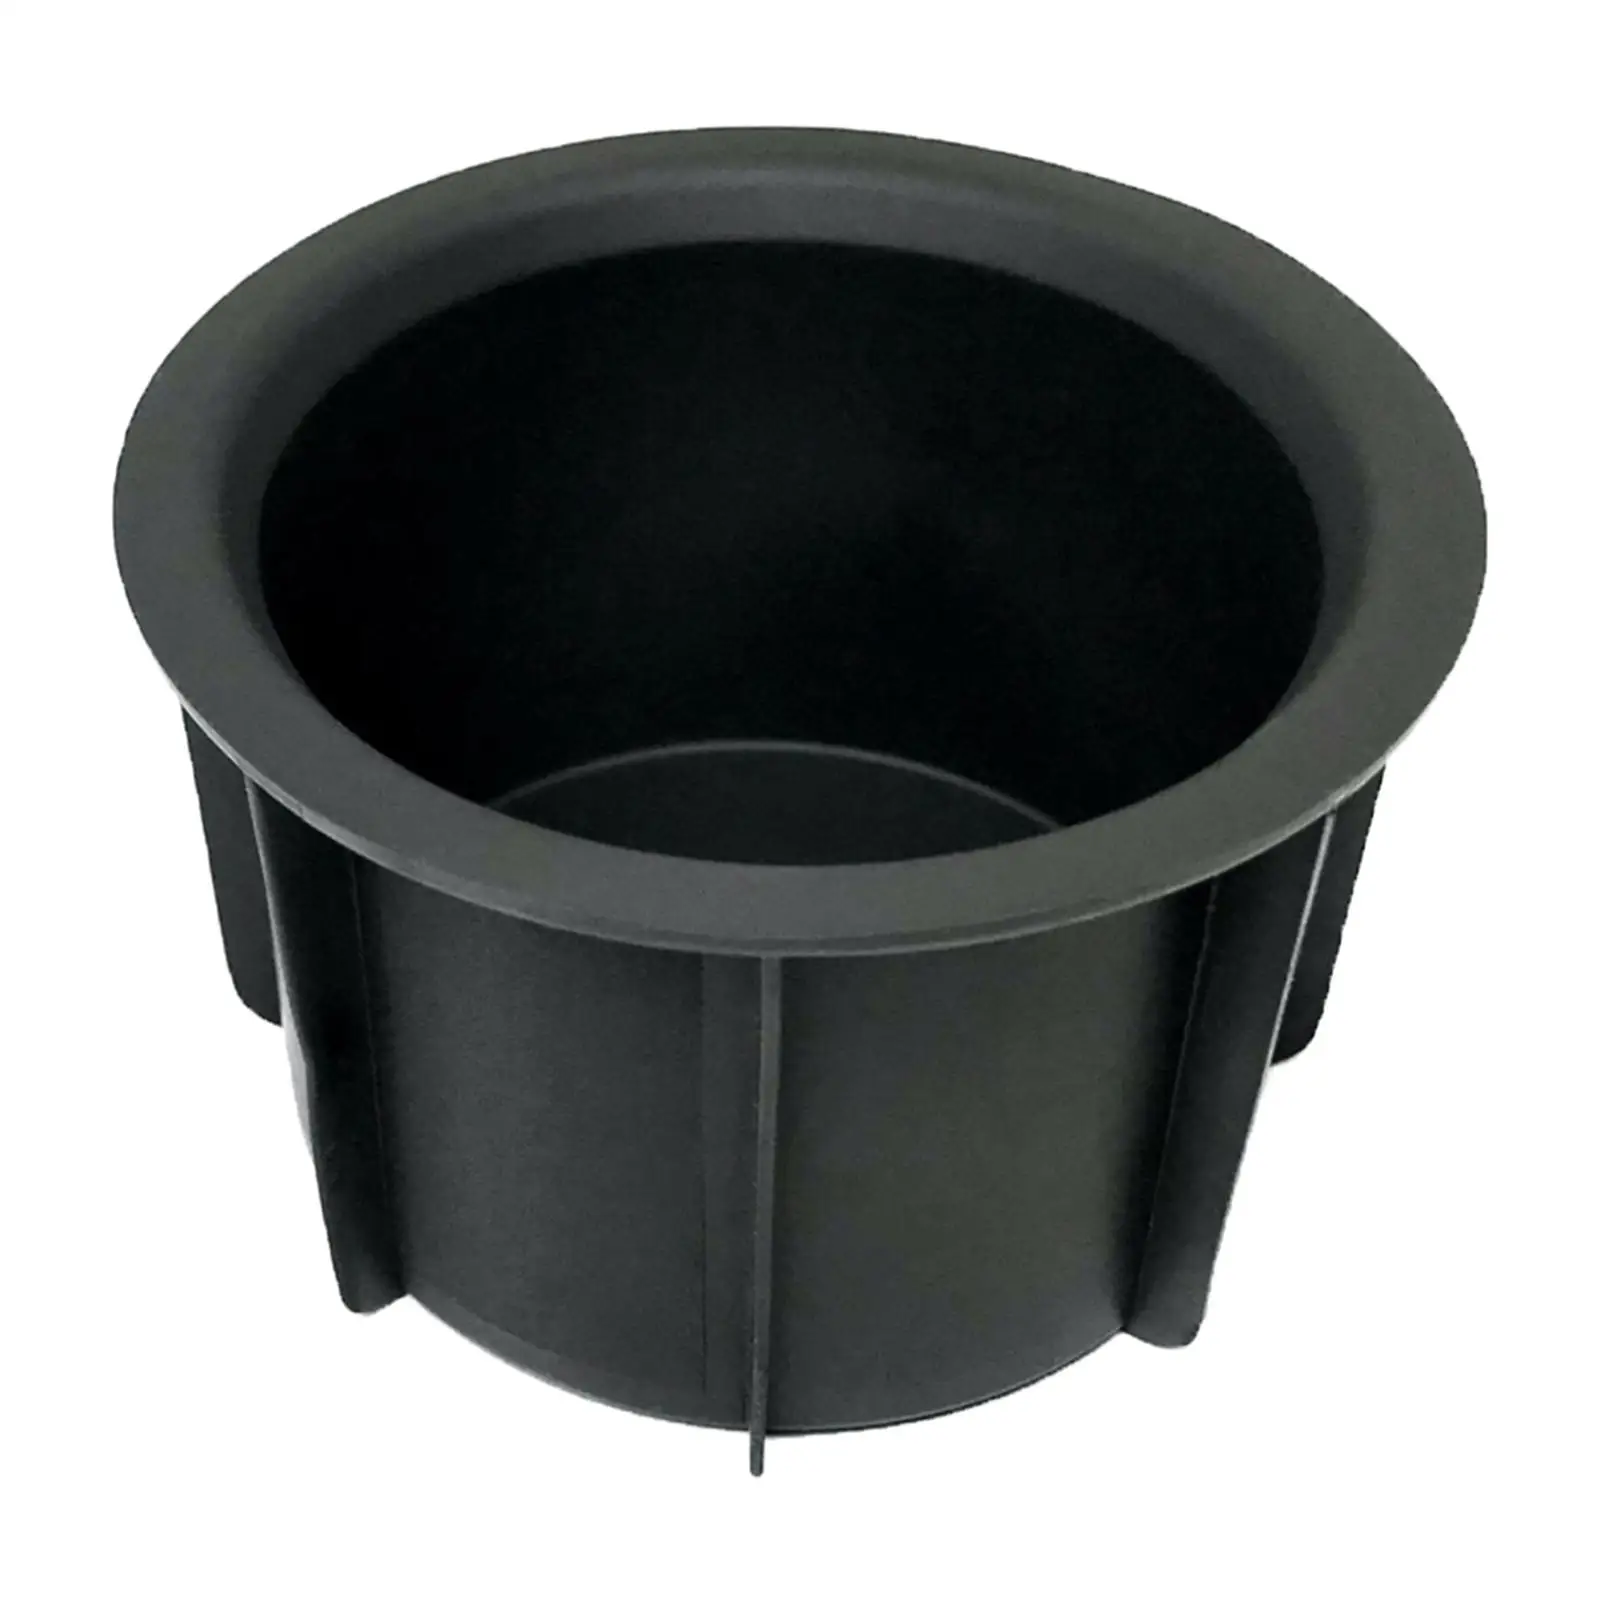  Console Cup Holder Insert for  2007 2008 2009 20011 20113 2014 55616-350561635010 Automotive Accessories